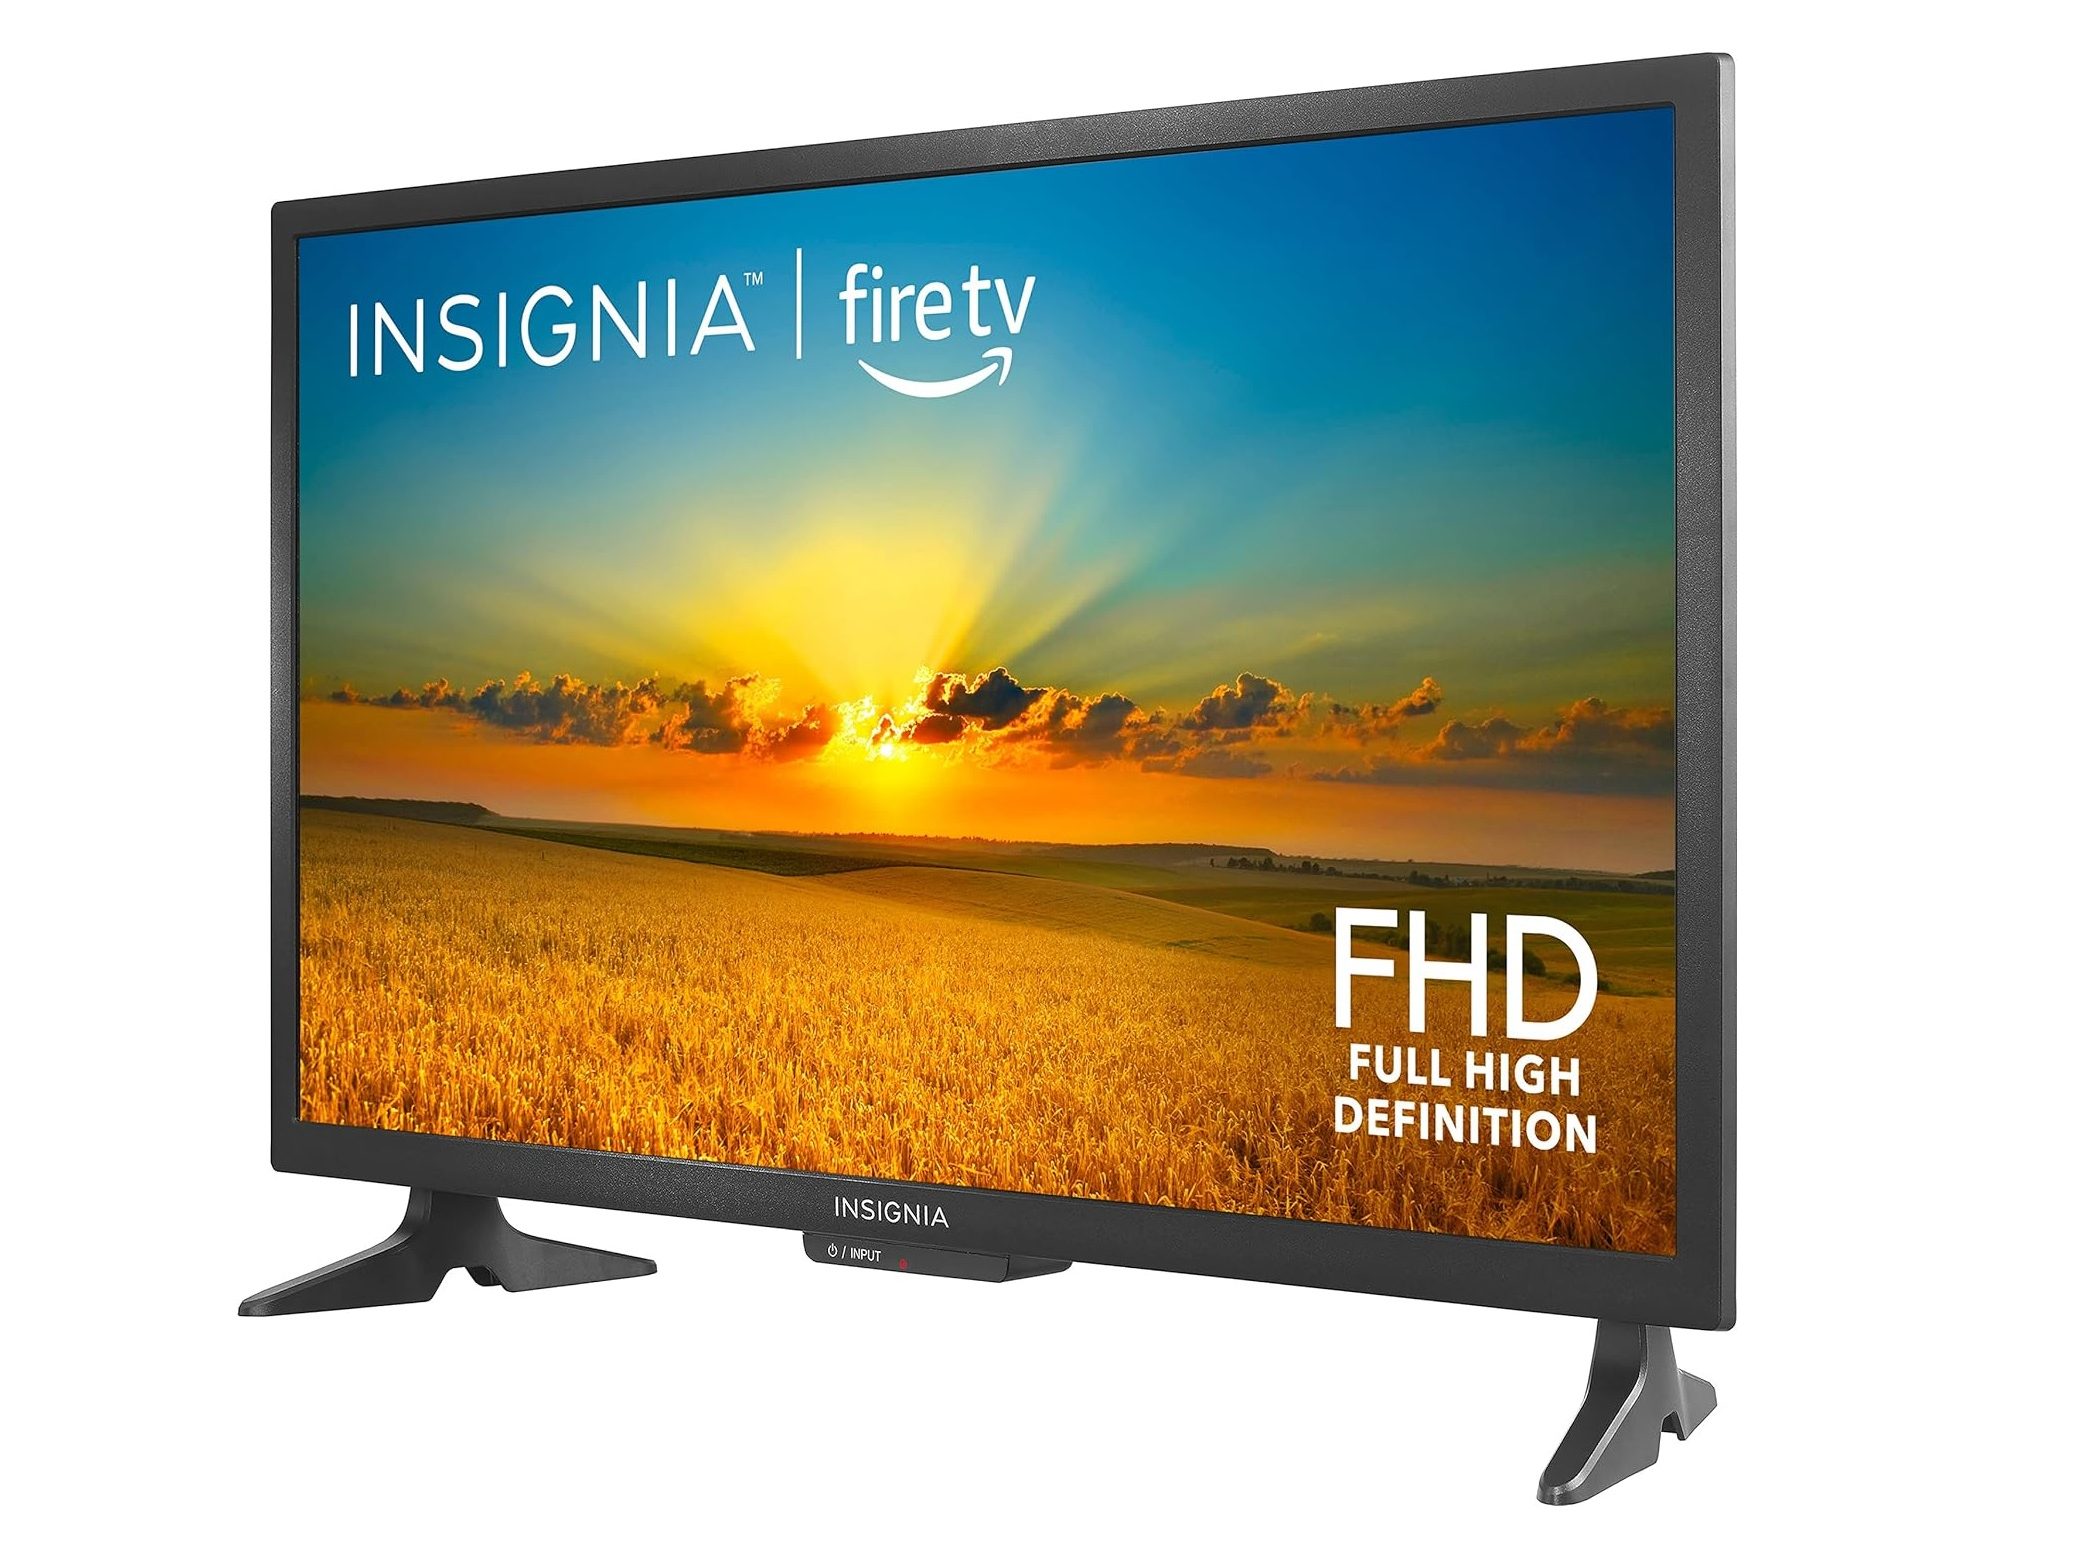 The Insignia F20 1080p Fire TV as seen from an angle.